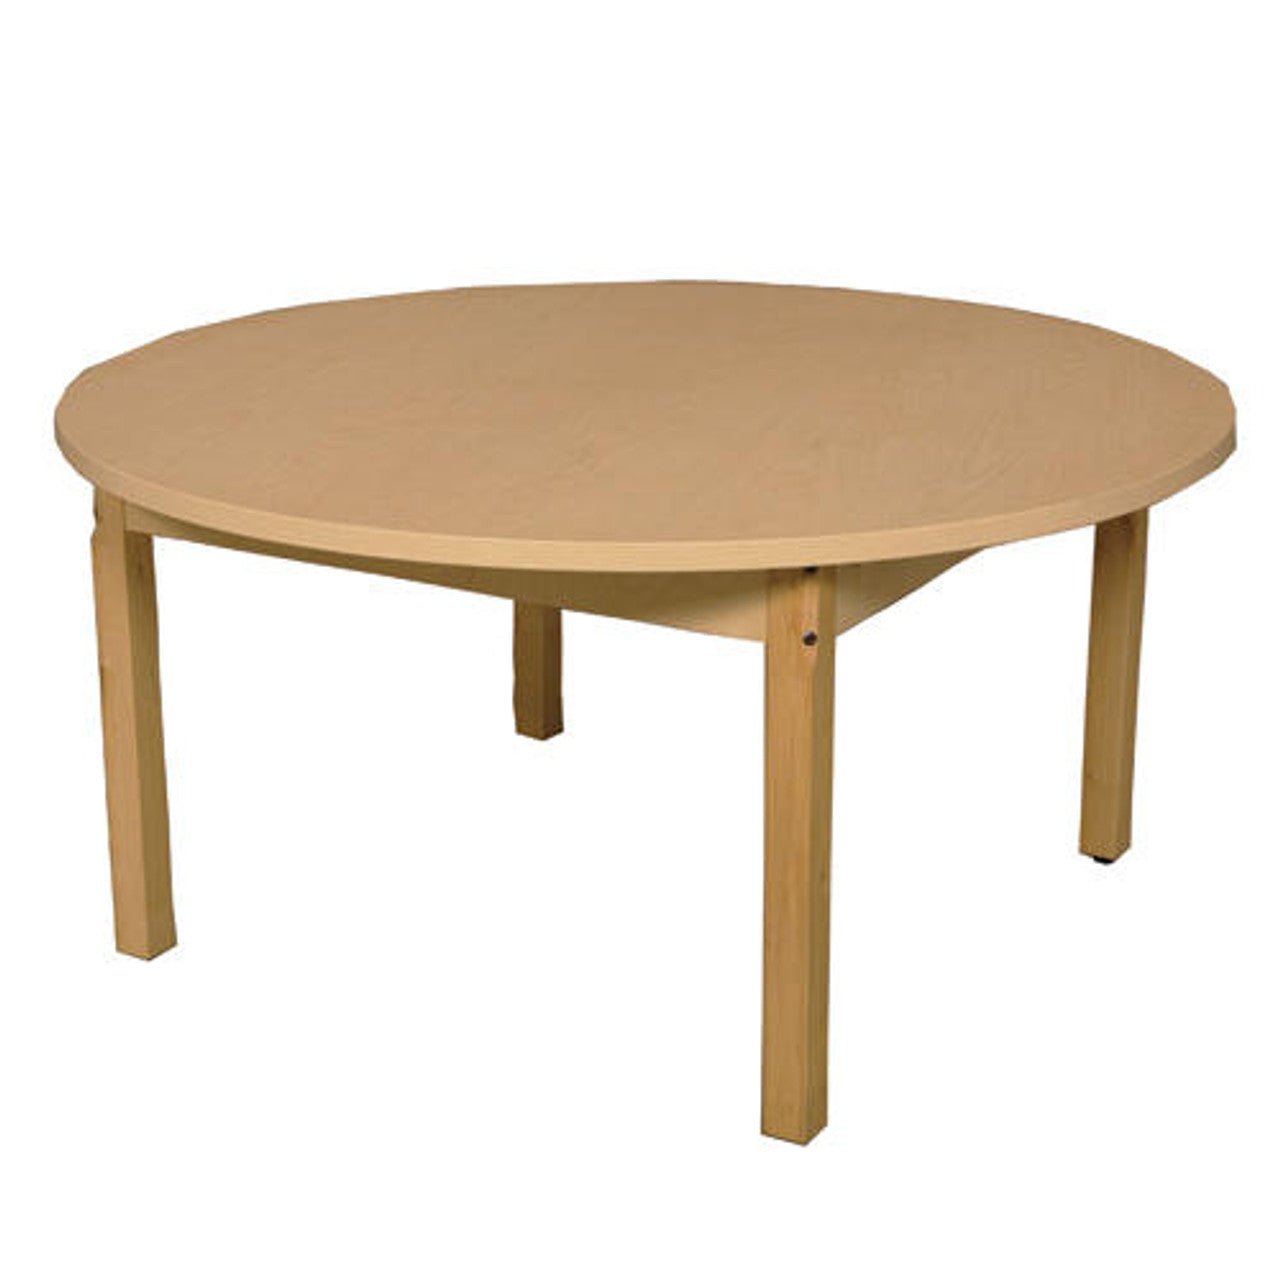 Round High Pressure Laminate Table with Hardwood Legs- 24"